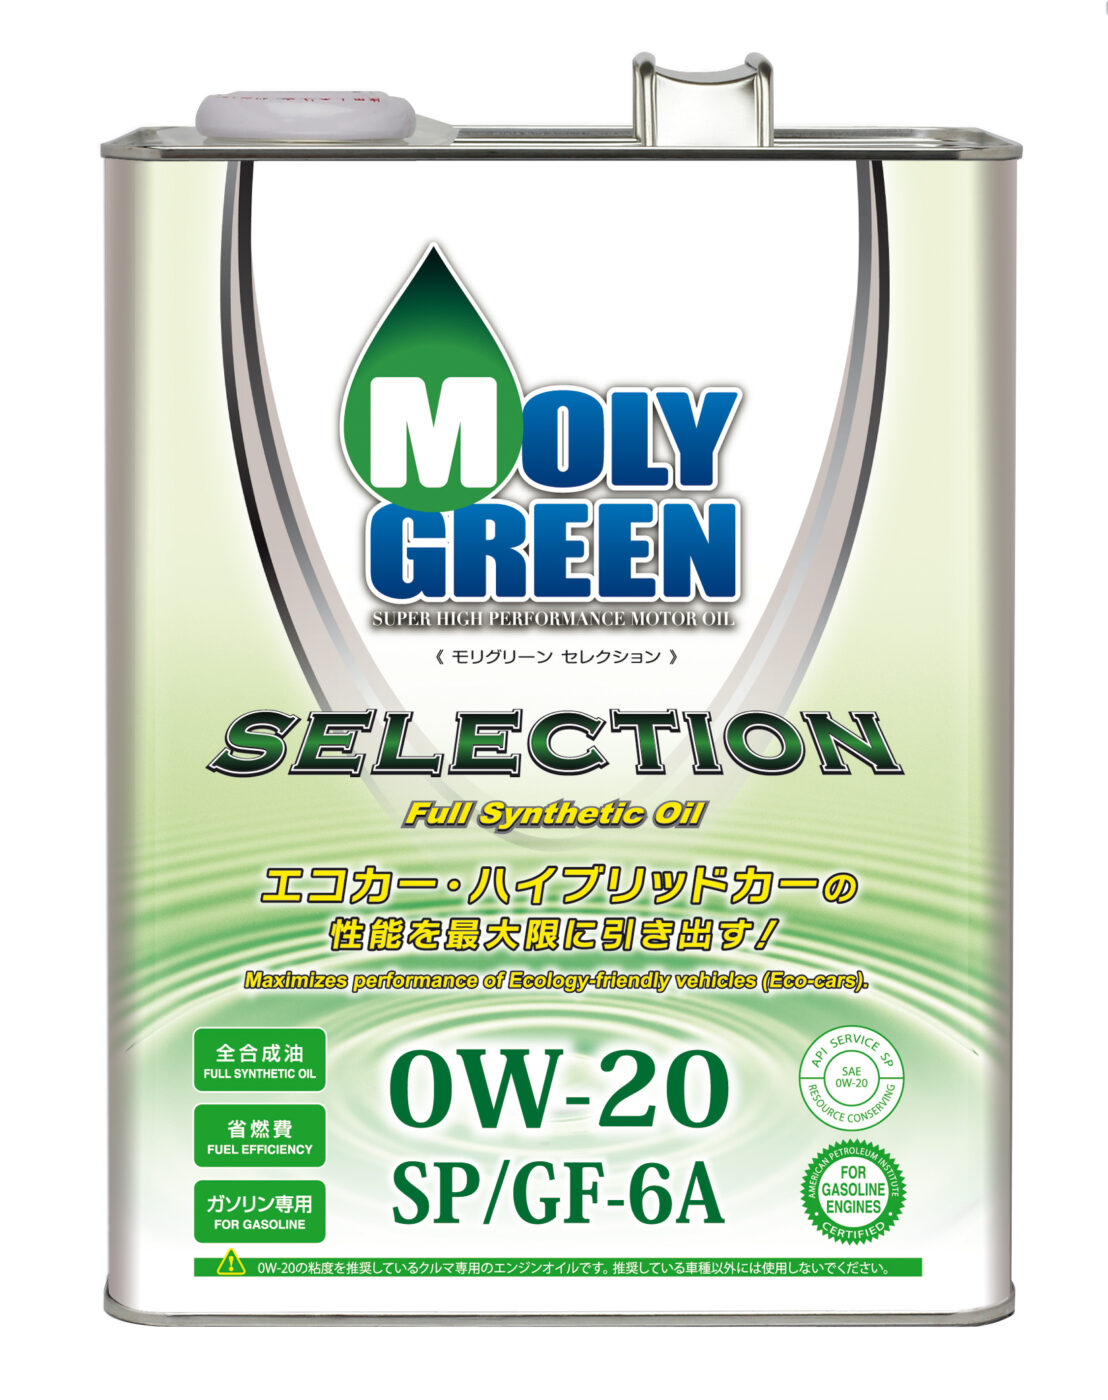 SELECTION 0W-20 | MOLYGREEN supply lubricants for vehicles across the globe.